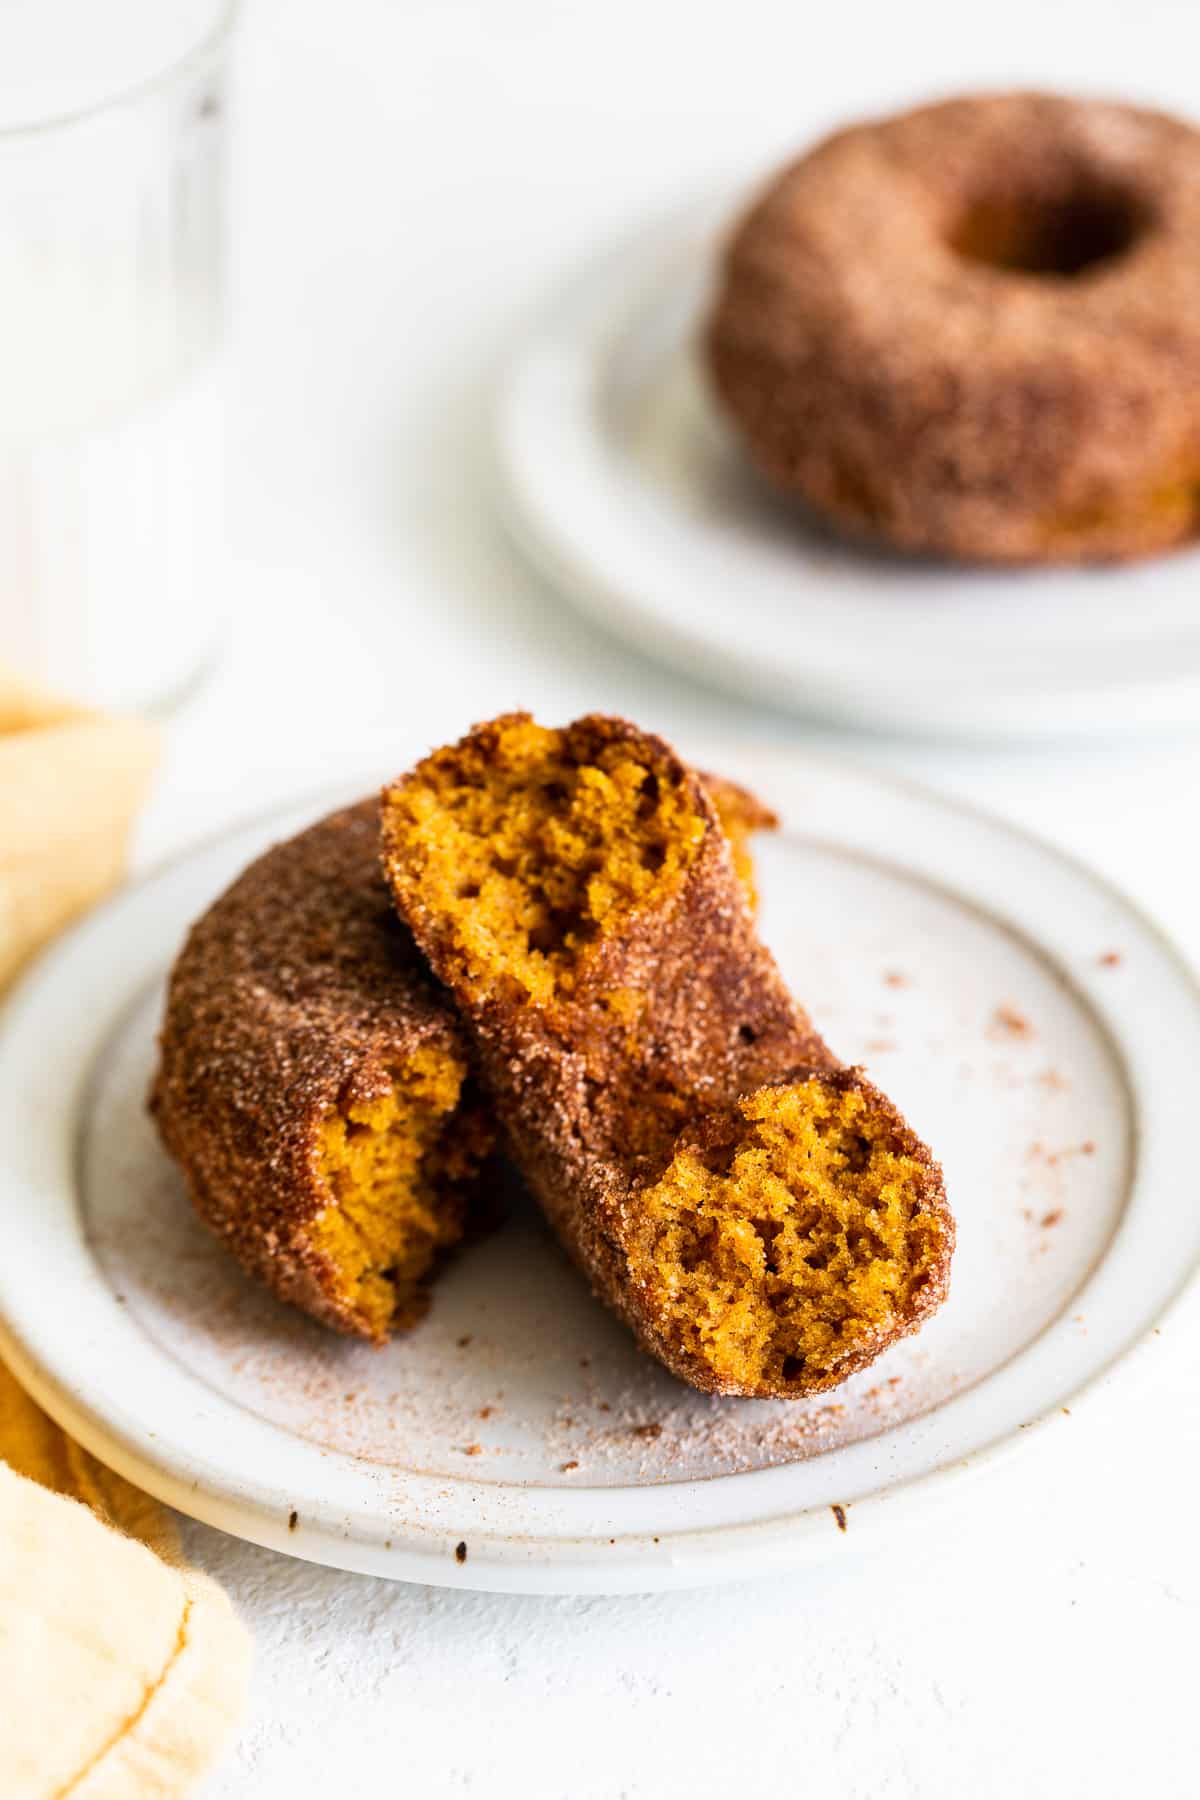 baked pumpkin donuts with cinnamon sugar on plate.